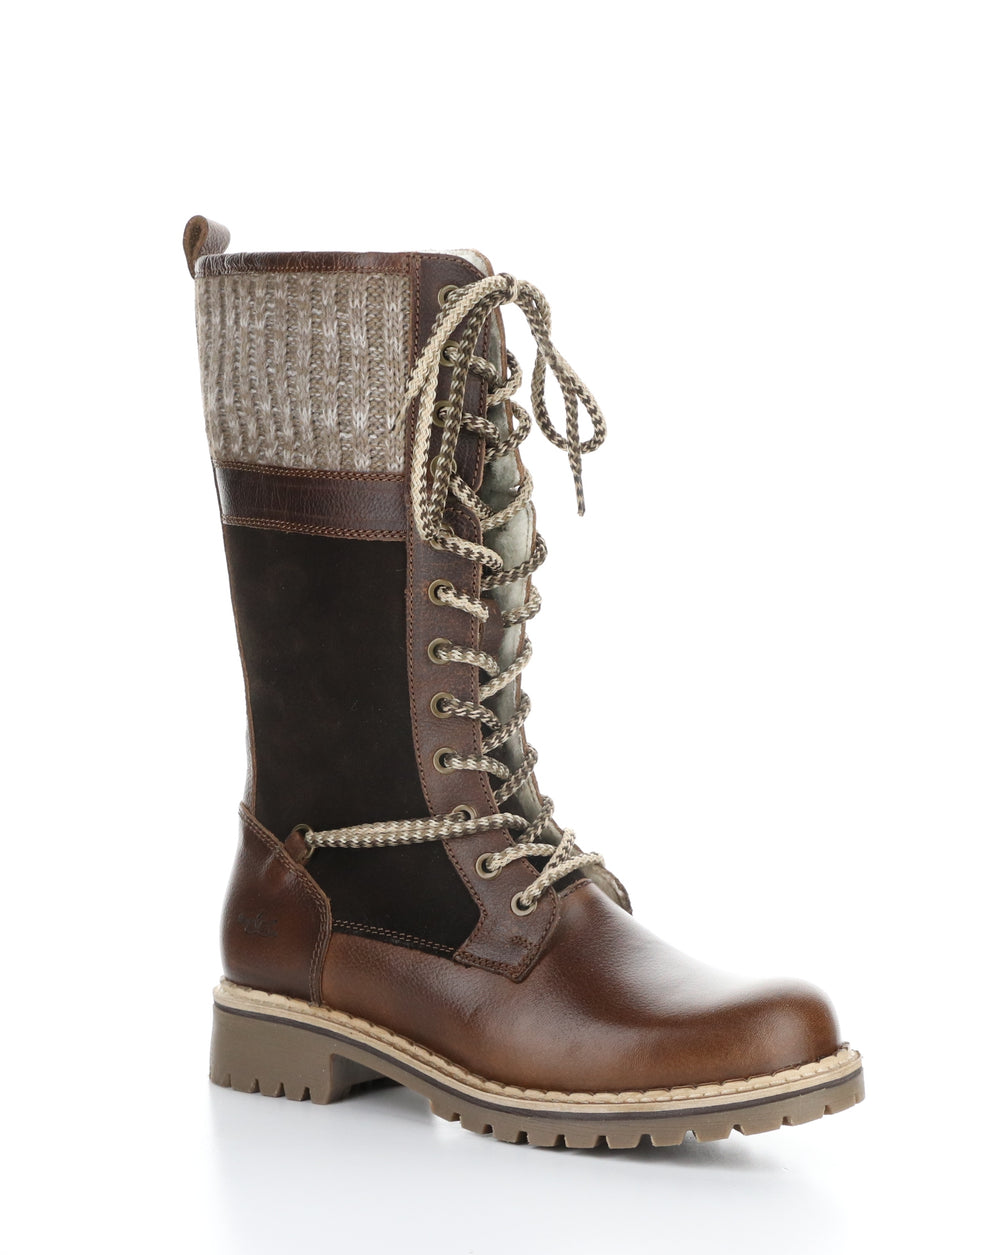 HAVEN BRANDY/COFFEE/TAUPE Round Toe Boots